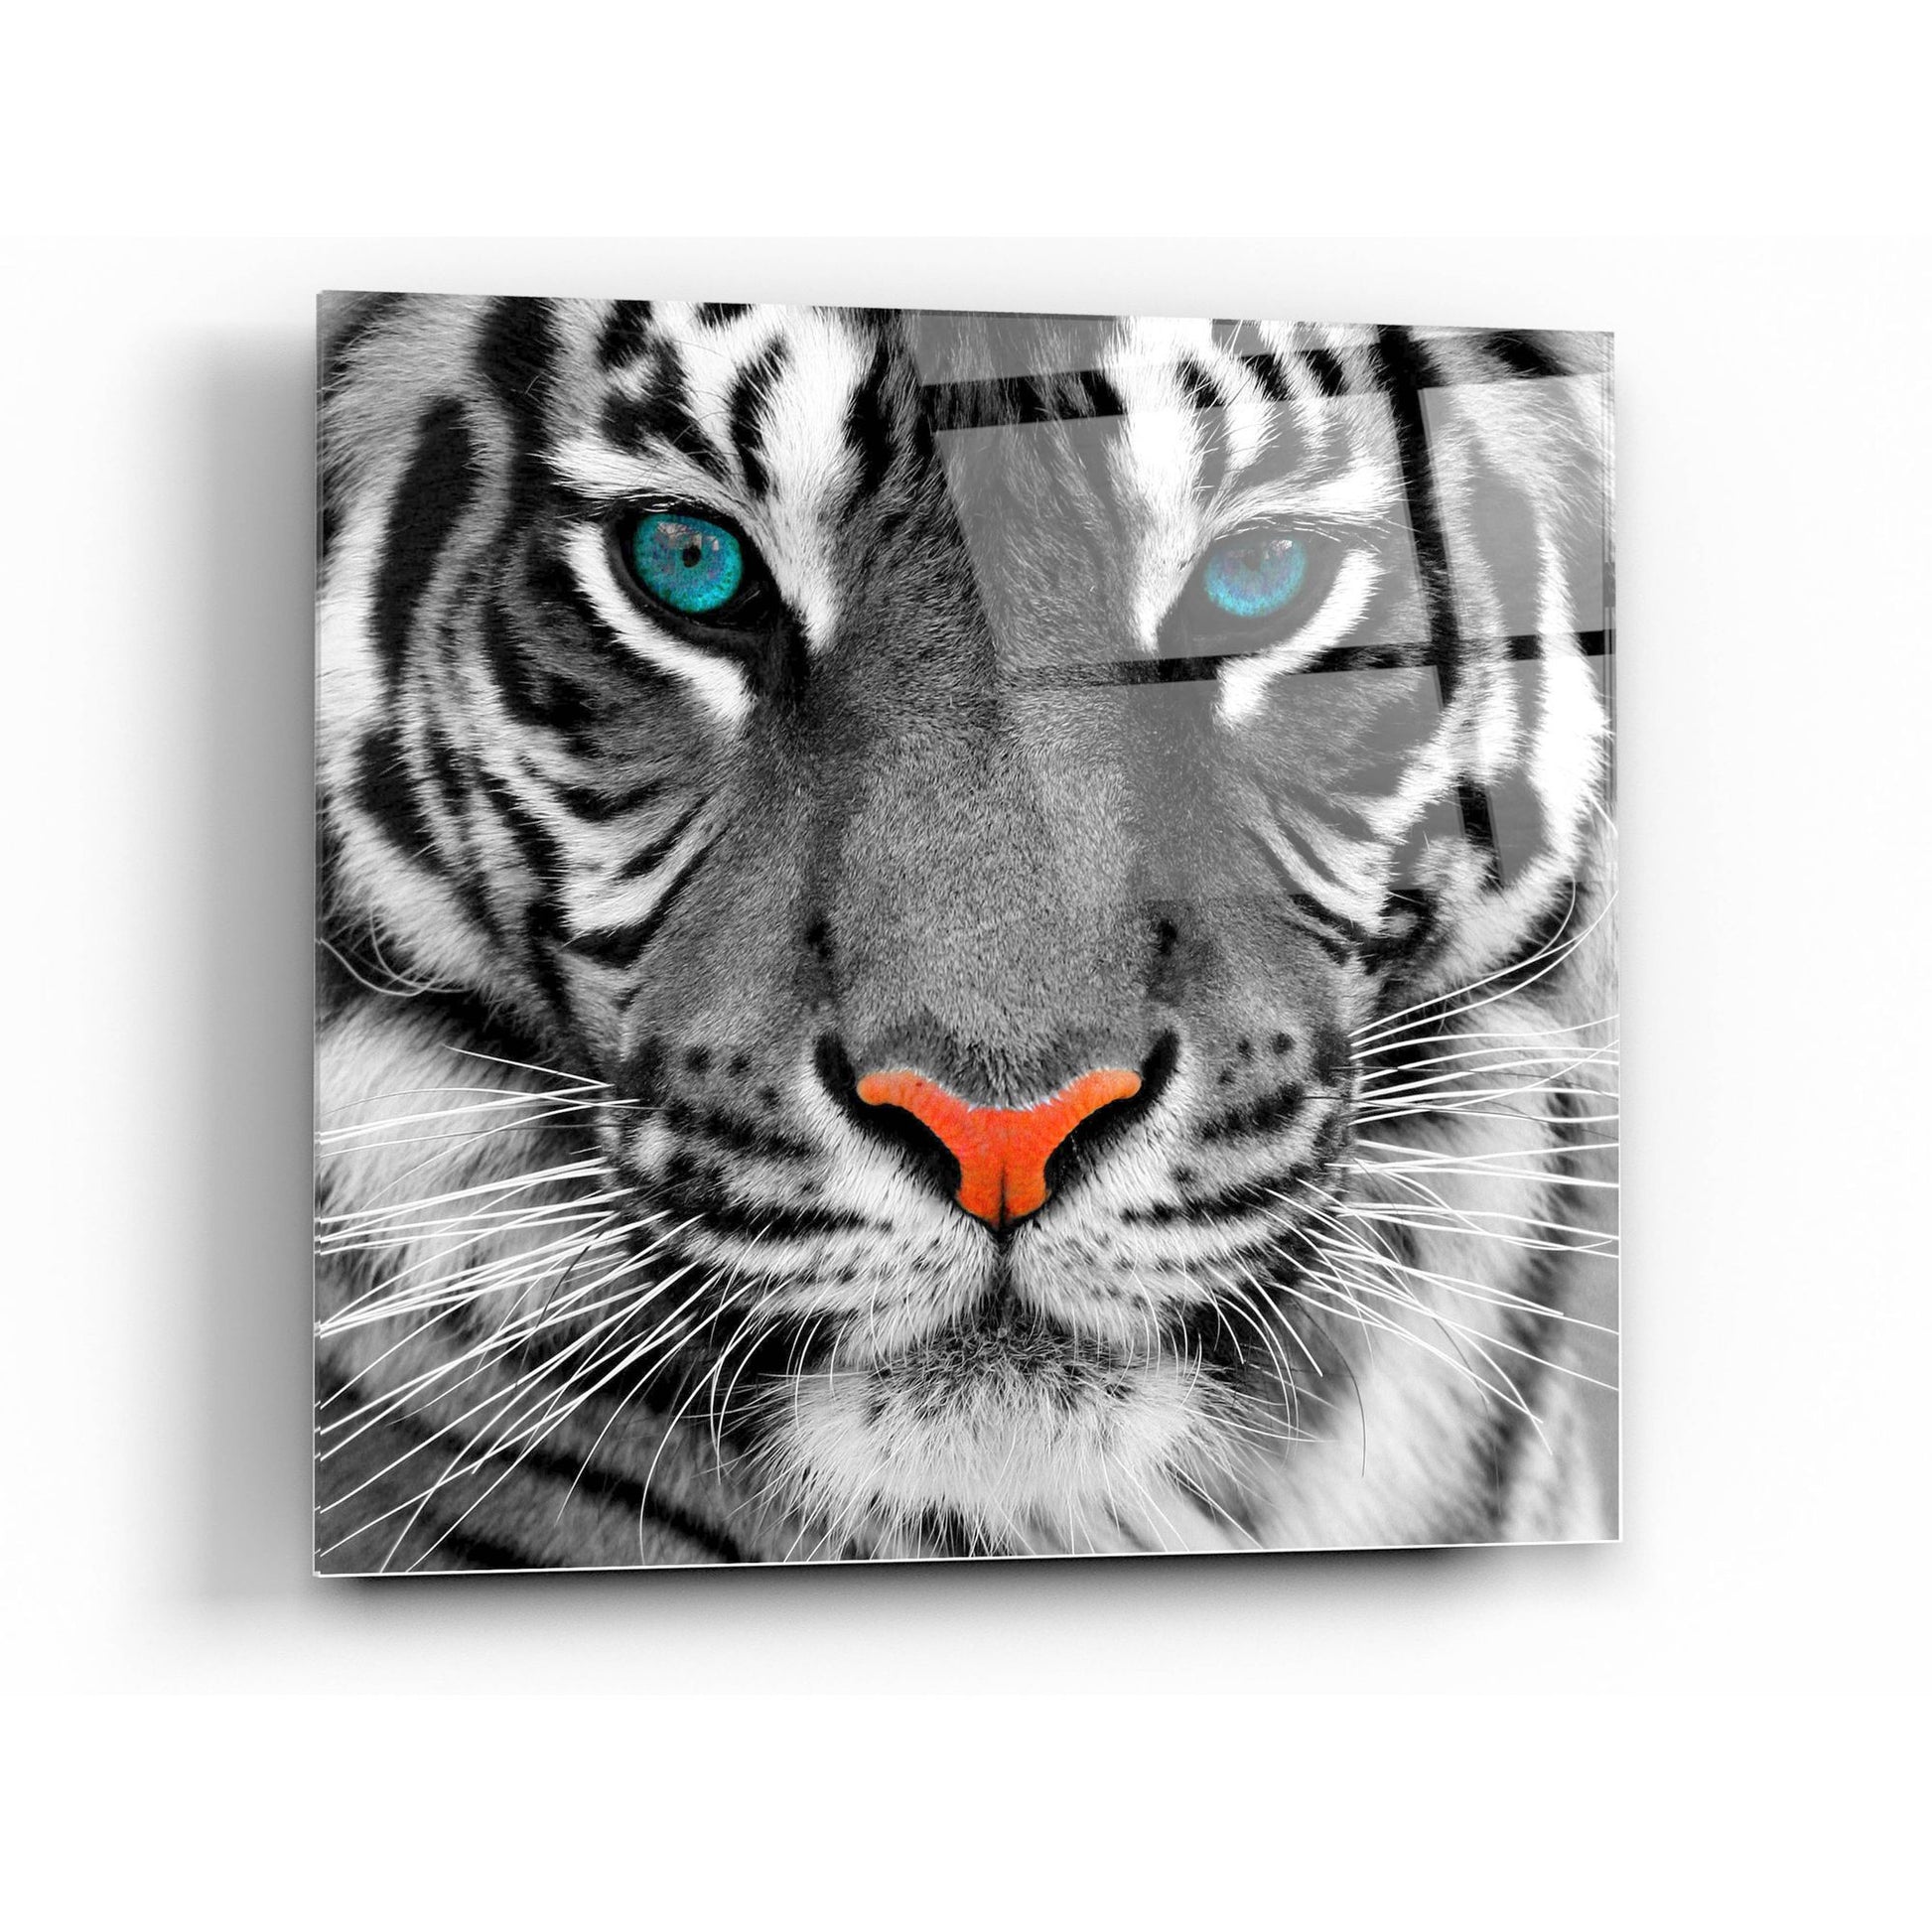 Epic Art 'Thrill of the Tiger' Acrylic Glass Wall Art,36x36